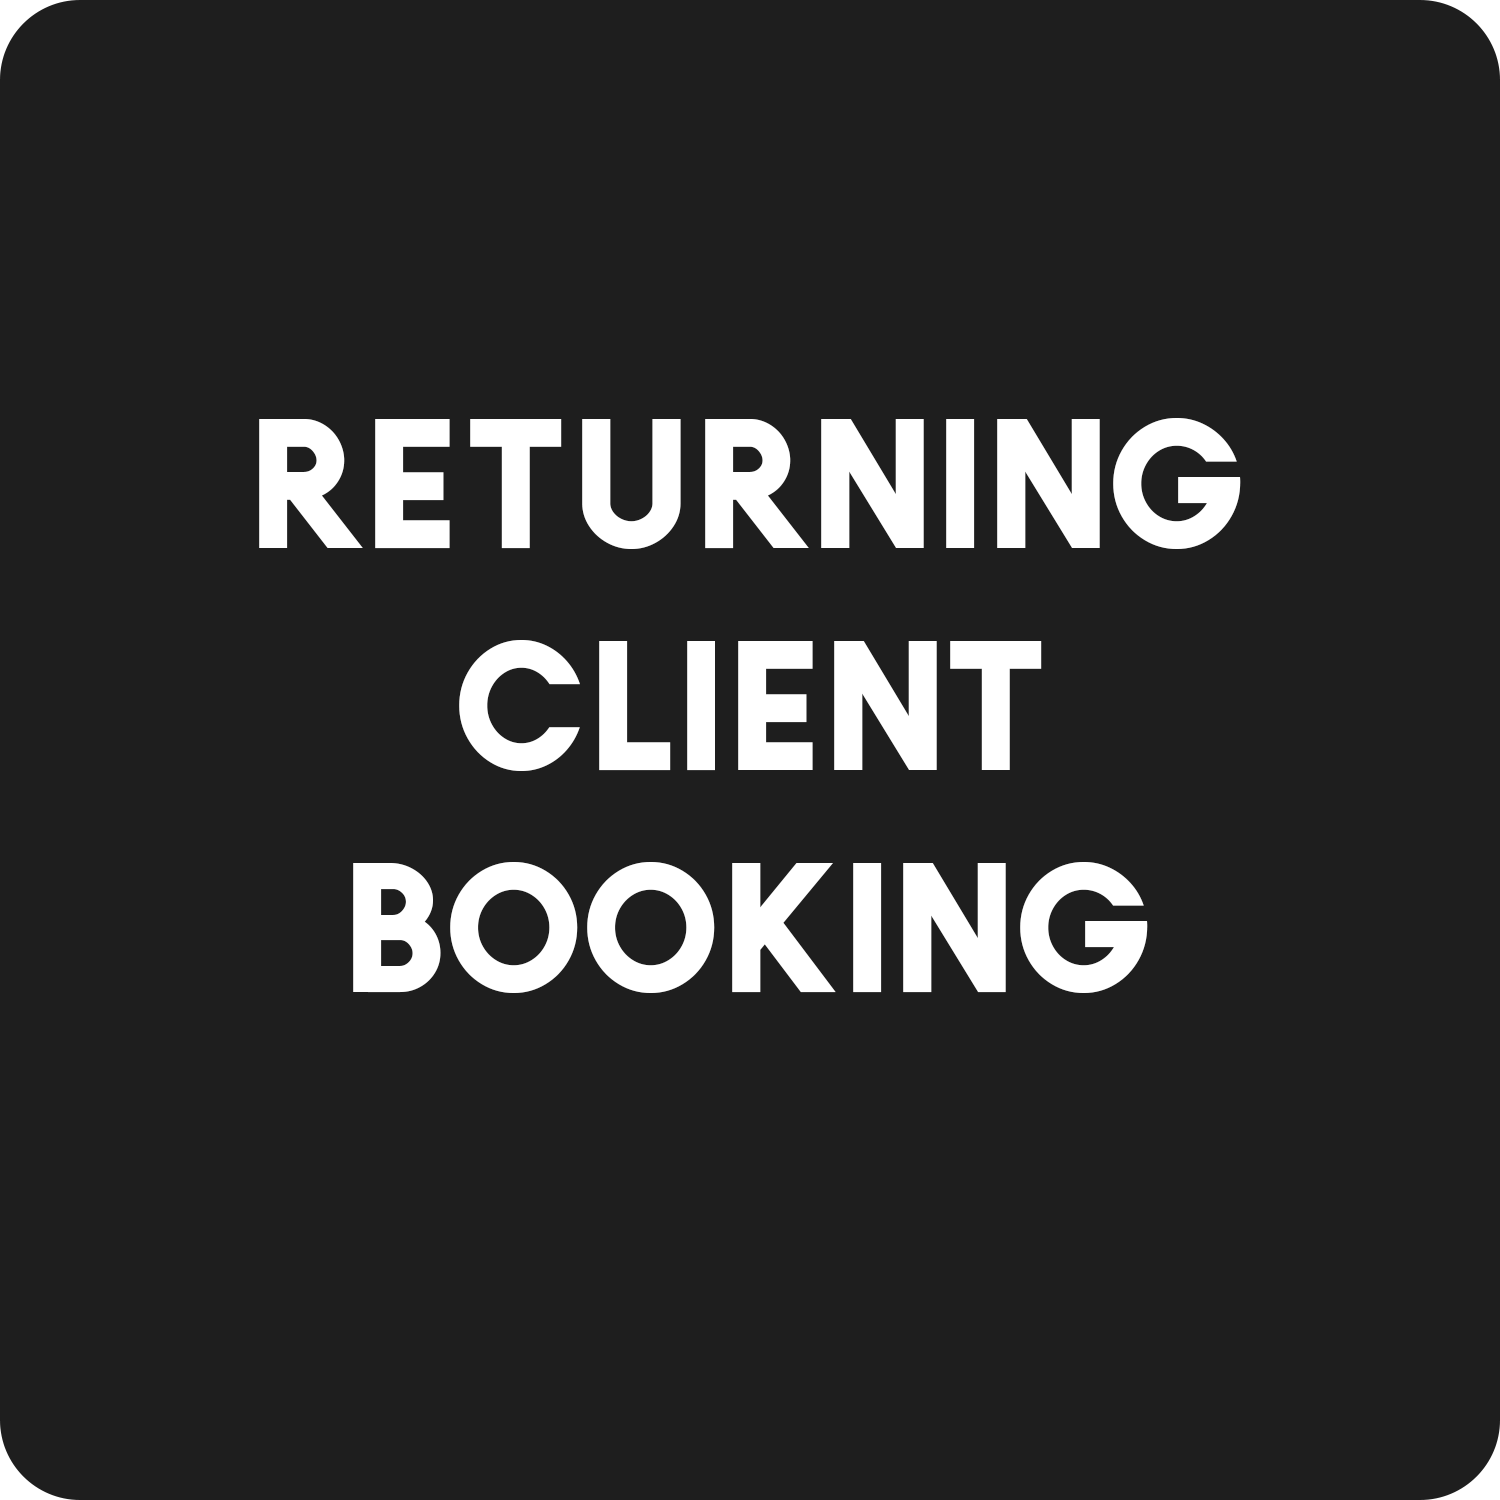 Returning Client Booking